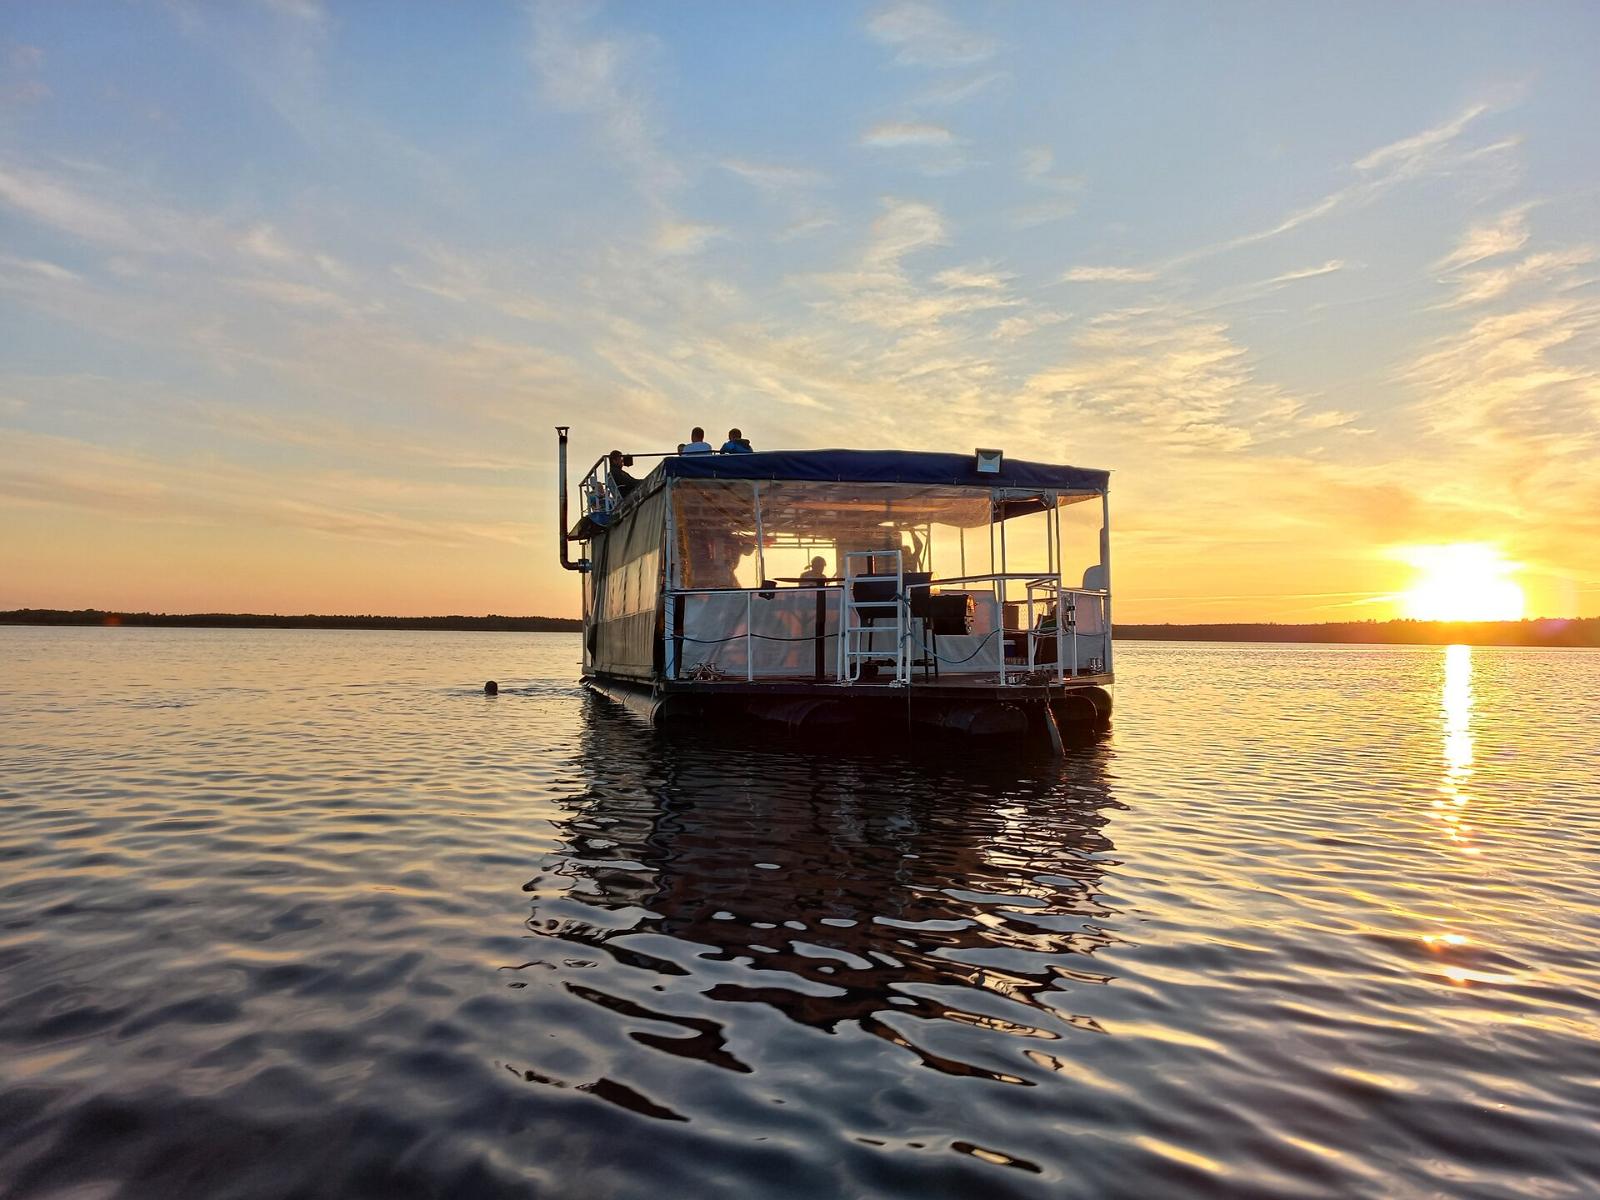 The picture shows the Raft Sauna on Lake Saadjärv, with a sunset in the background